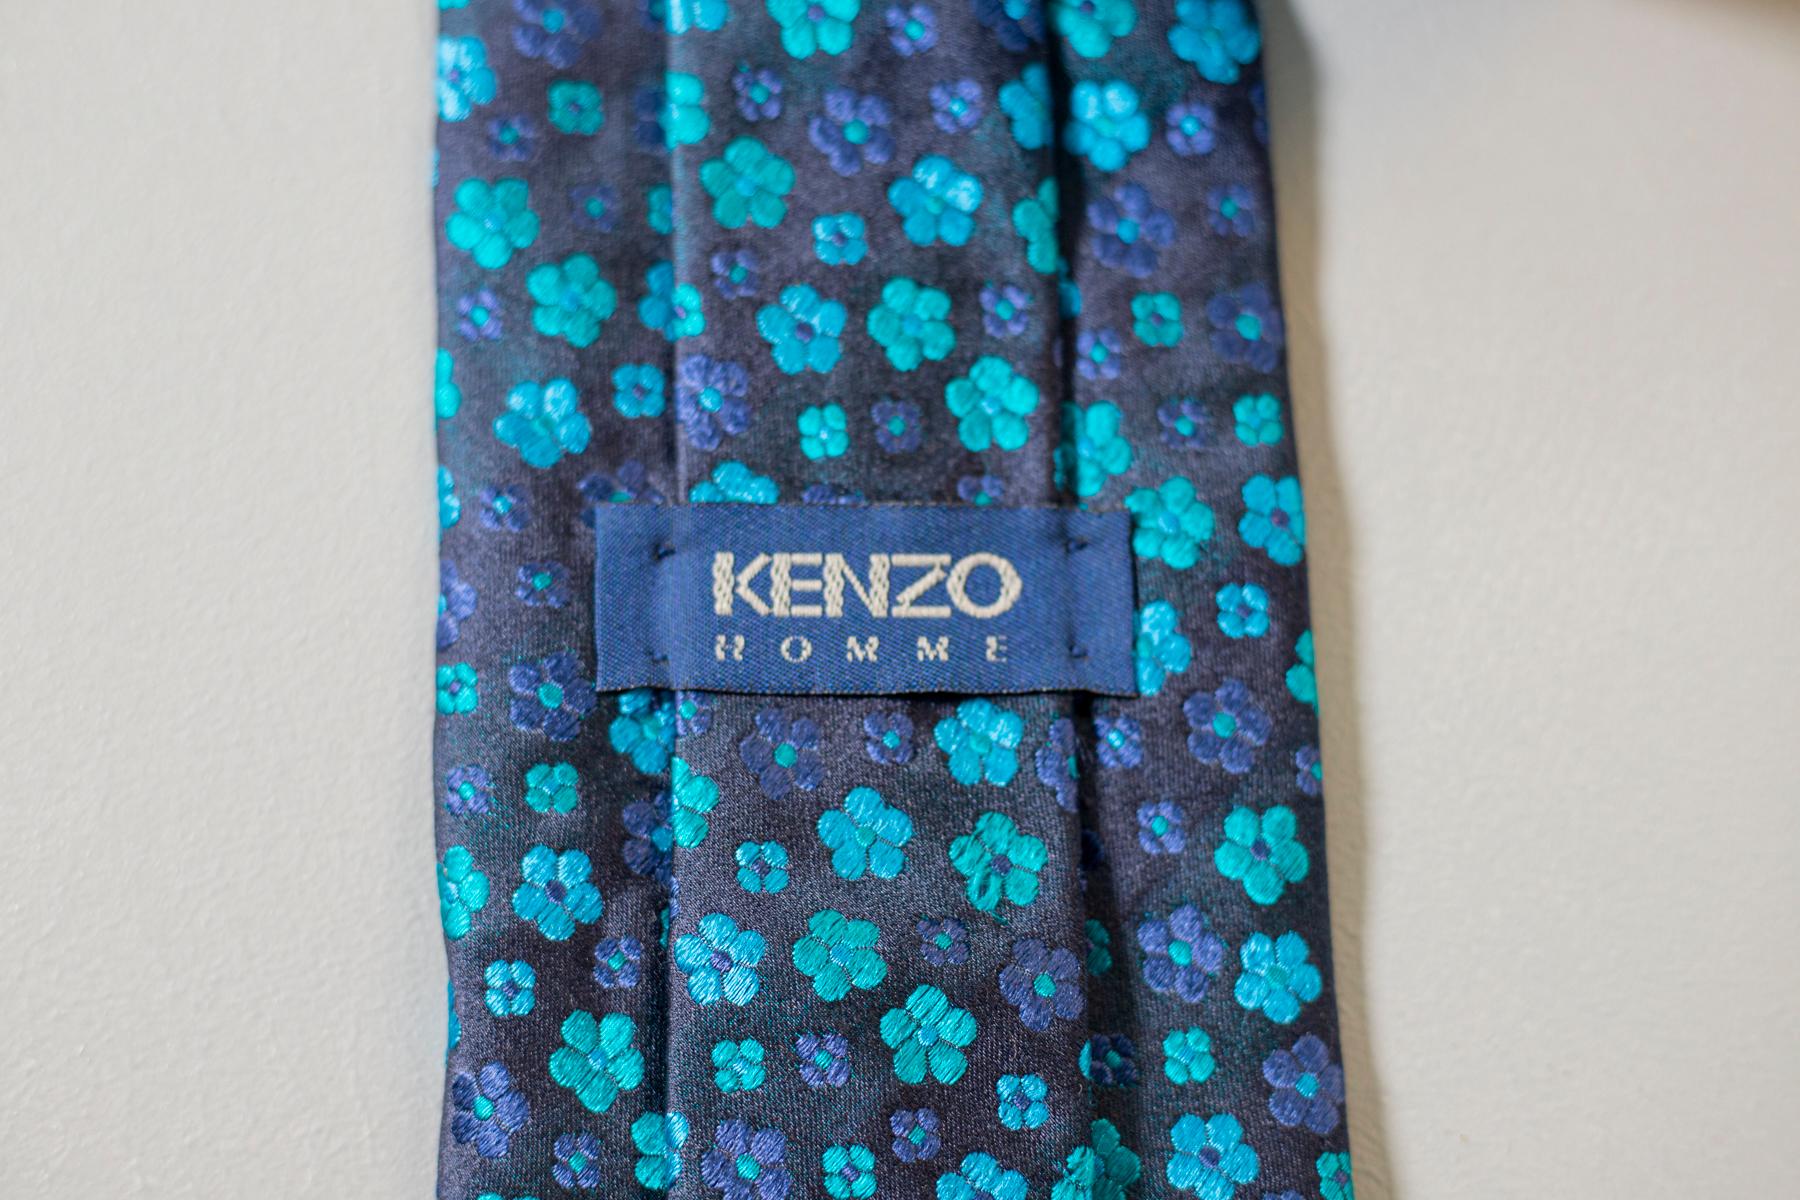 This vintage tie is in classic Kenzo’s style. Made in all silk for the collection Kenzo Homme, this tie is decorated with little blue and light-blue flowers on a dark-blue background. This accessory is perfect for a fun Sunday afternoon with